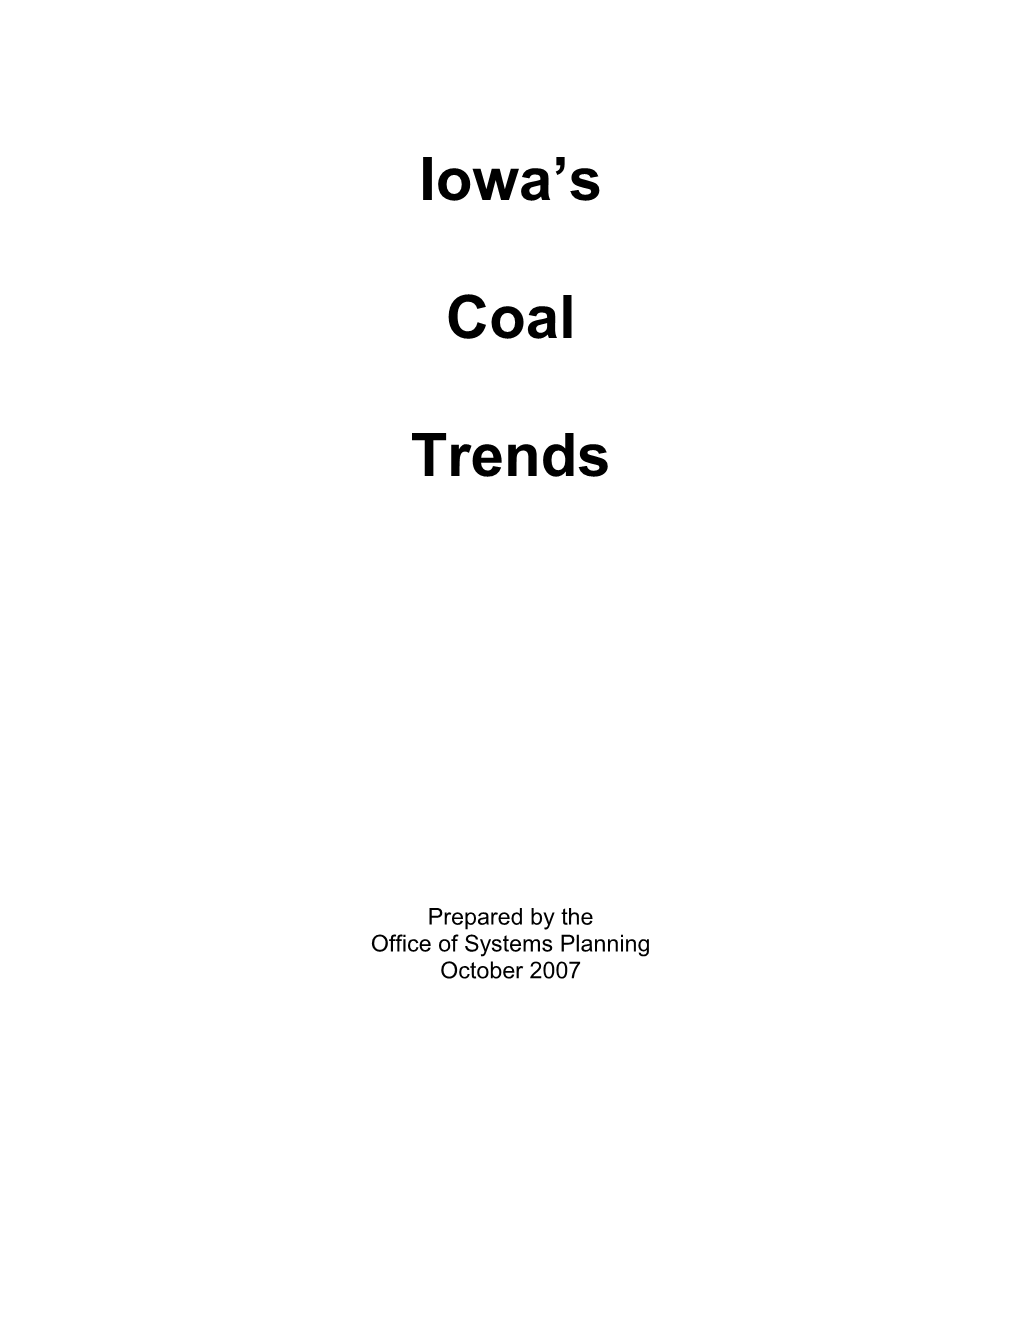 The US Produced 1.1 Billion Tons of Coal in 2005